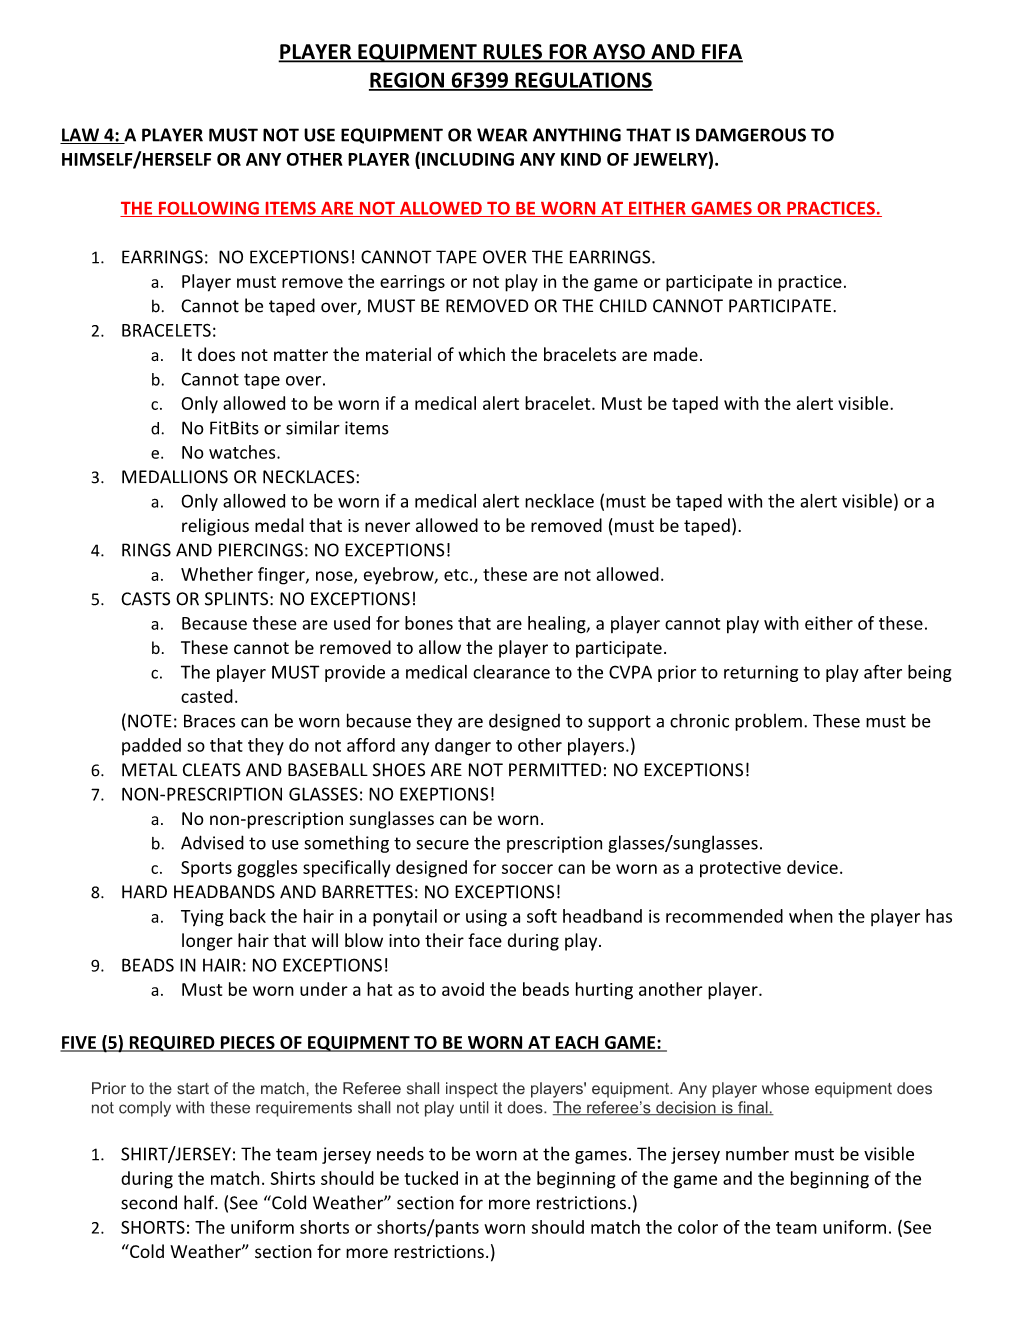 Player Equipment Rules for Ayso and Fifa